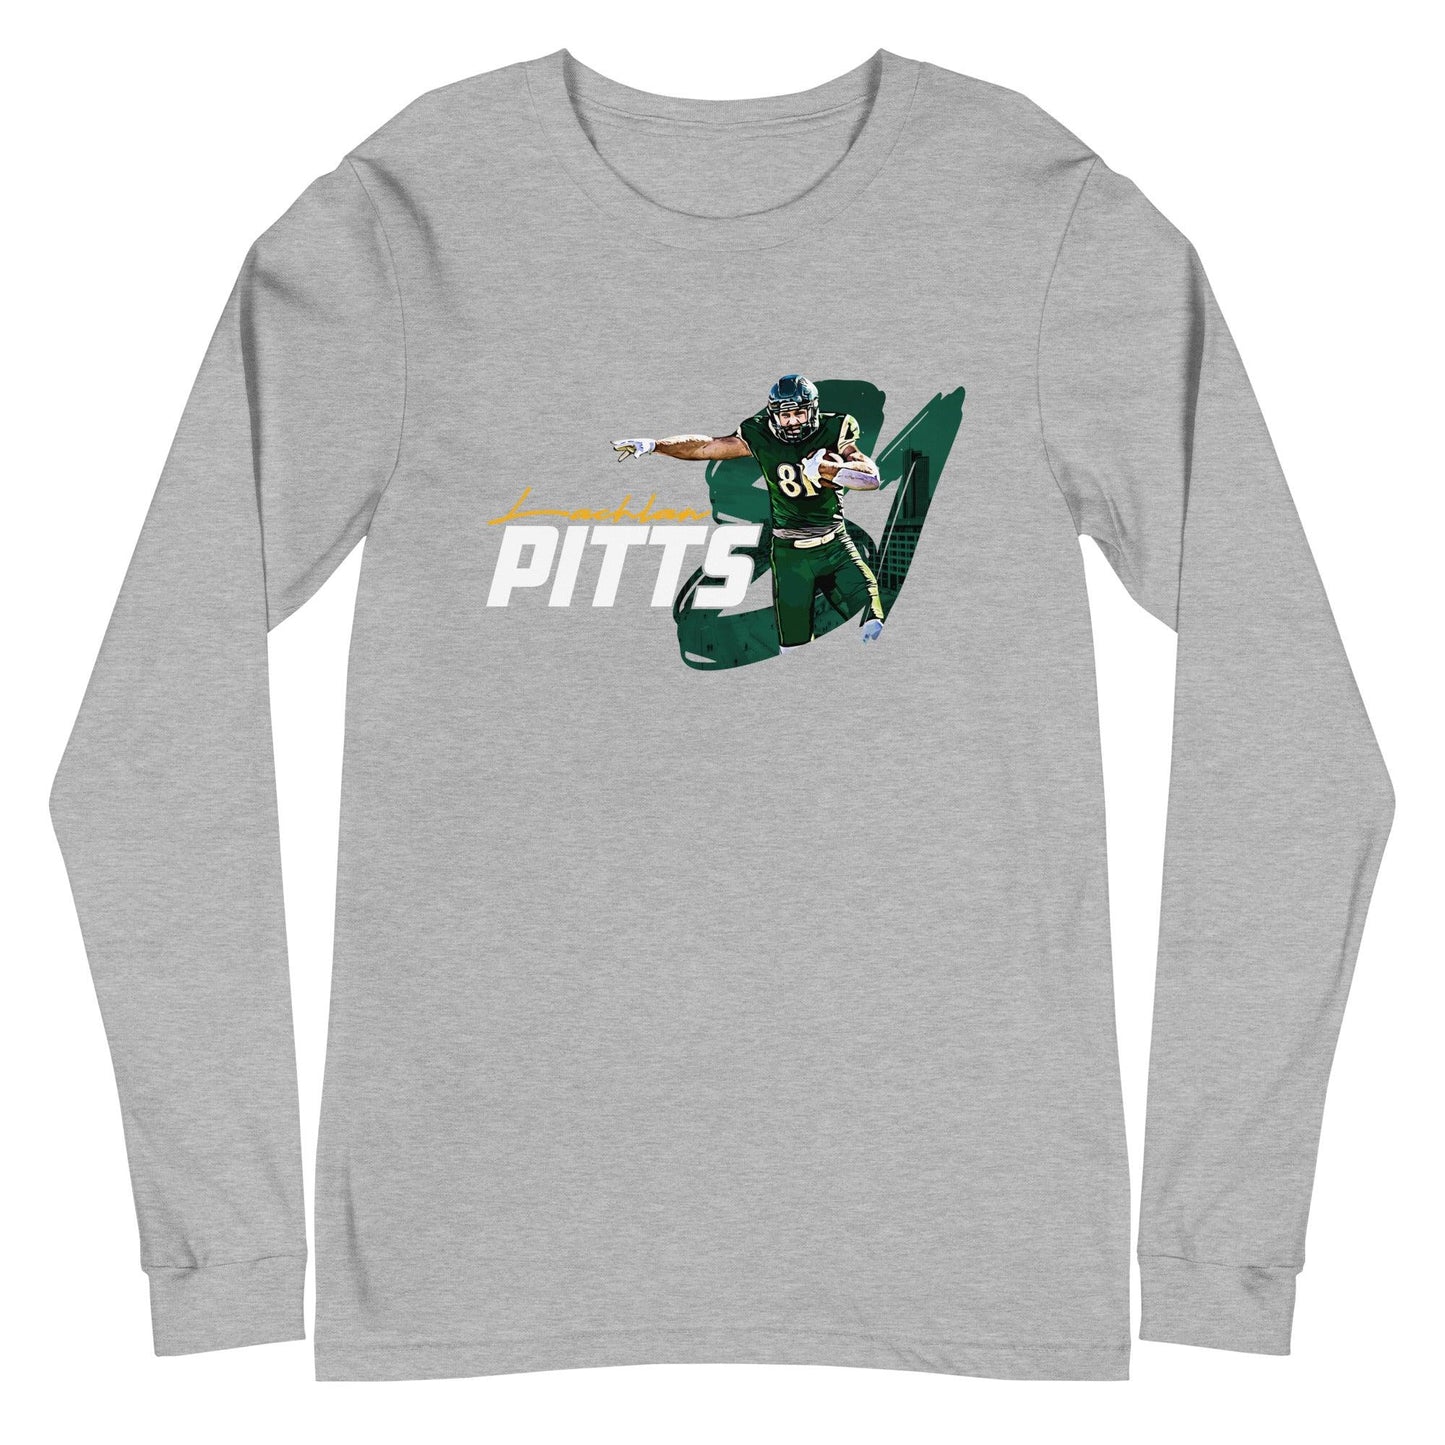 Lachlan Pitts "Gameday" Long Sleeve Tee - Fan Arch